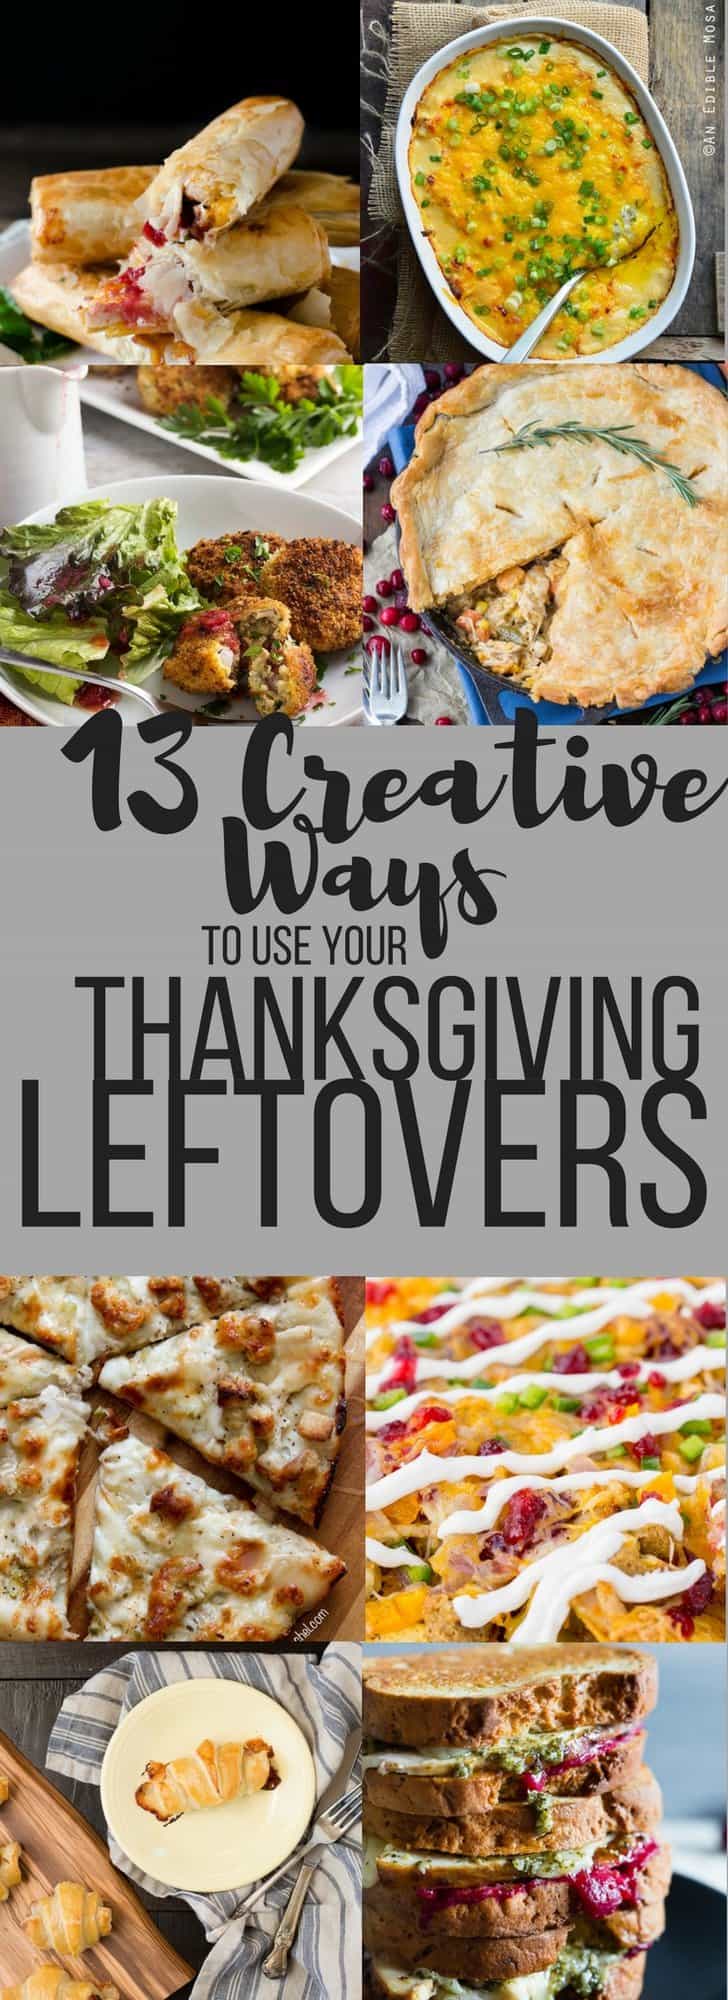 Have a fridge stuffed full of Thanksgiving leftovers? Here are twelve creative ways to use Thanksgiving leftovers that aren't soup!